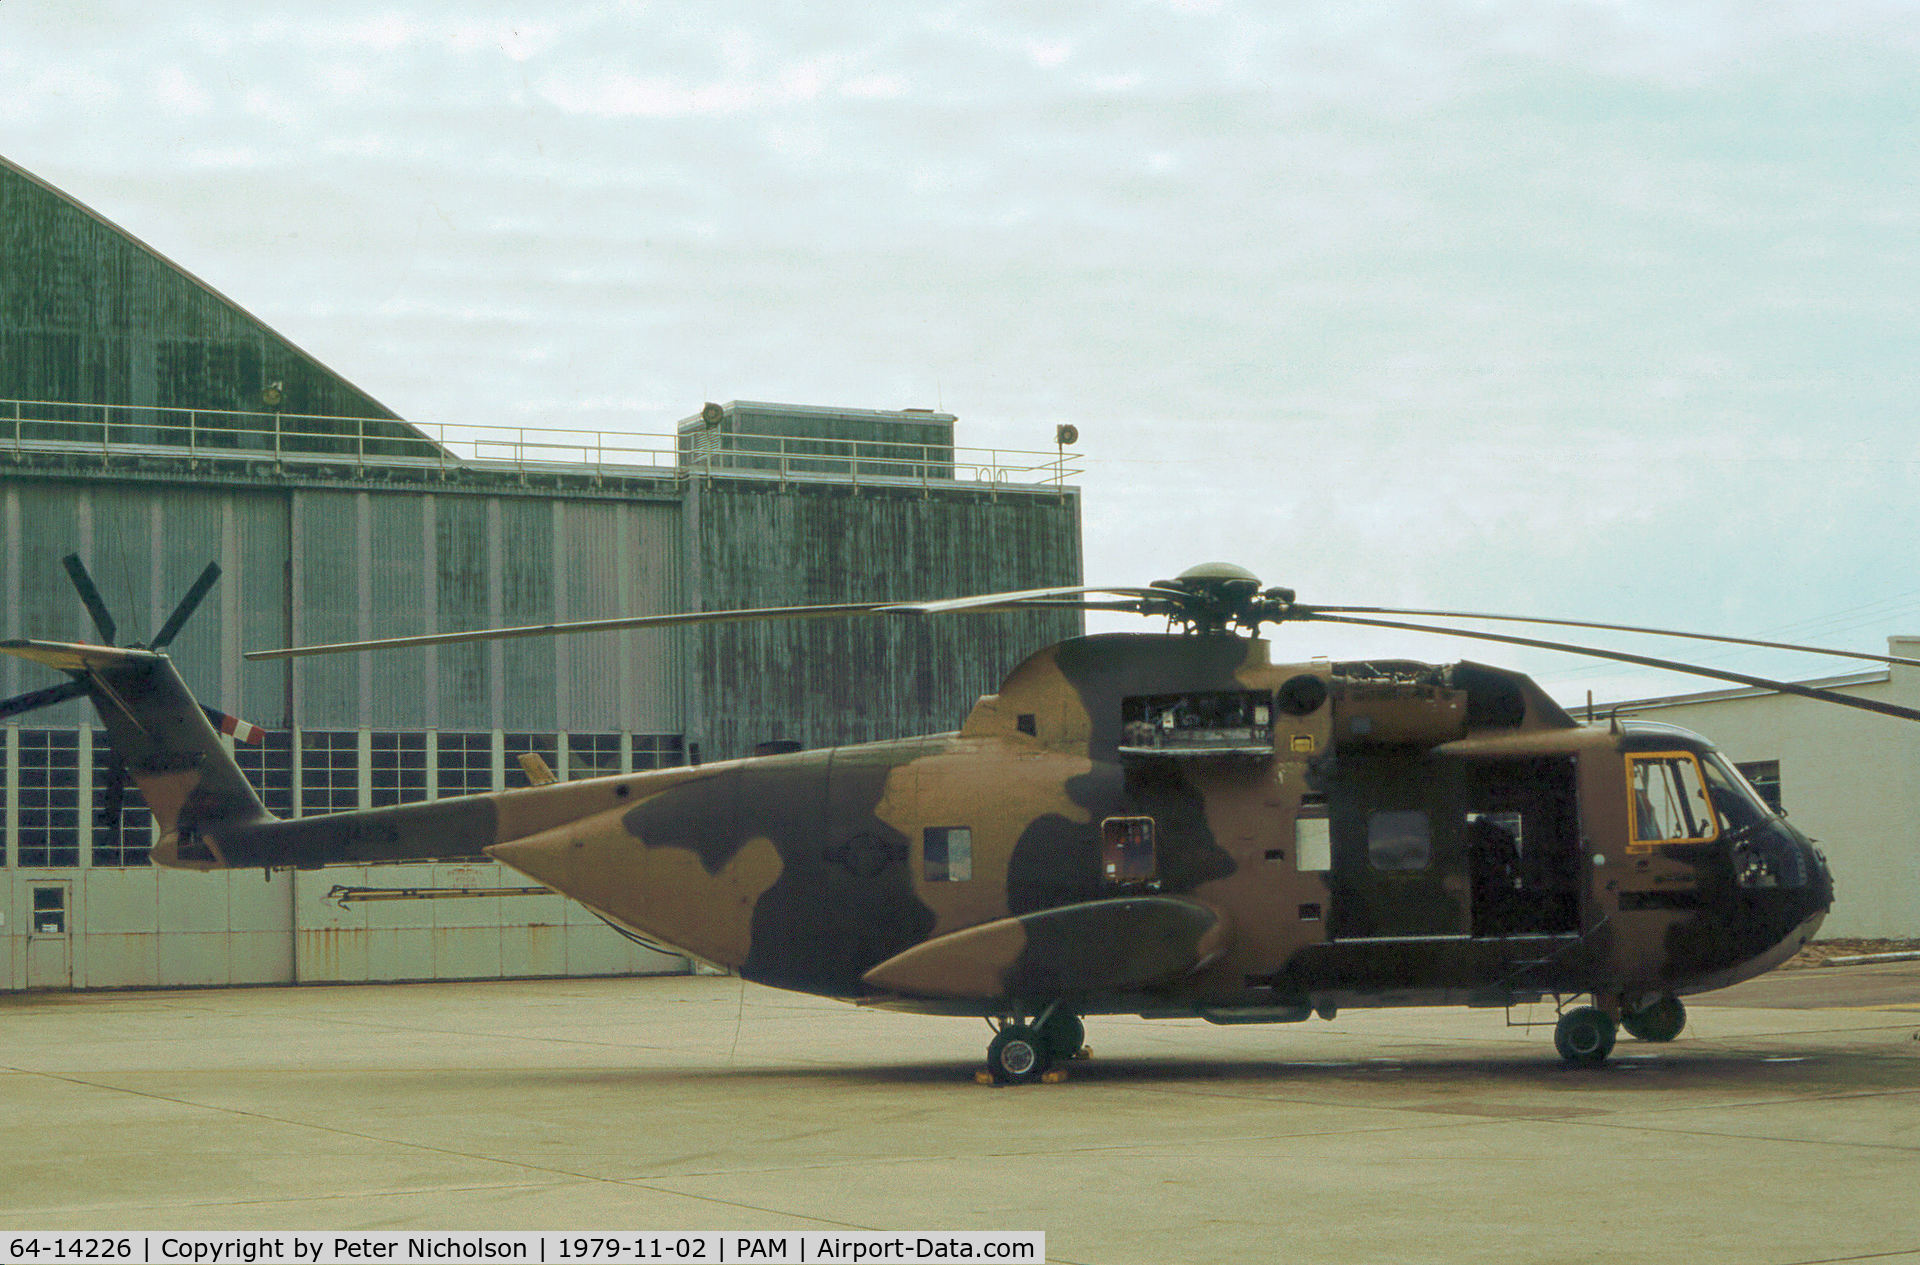 64-14226, 1964 Sikorsky CH-3C C/N 61529, CH-3C of 55th Aerospace Rescue & Recovery Squadron based at Eglin AFB visiting Tyndall AFB in November 1979.